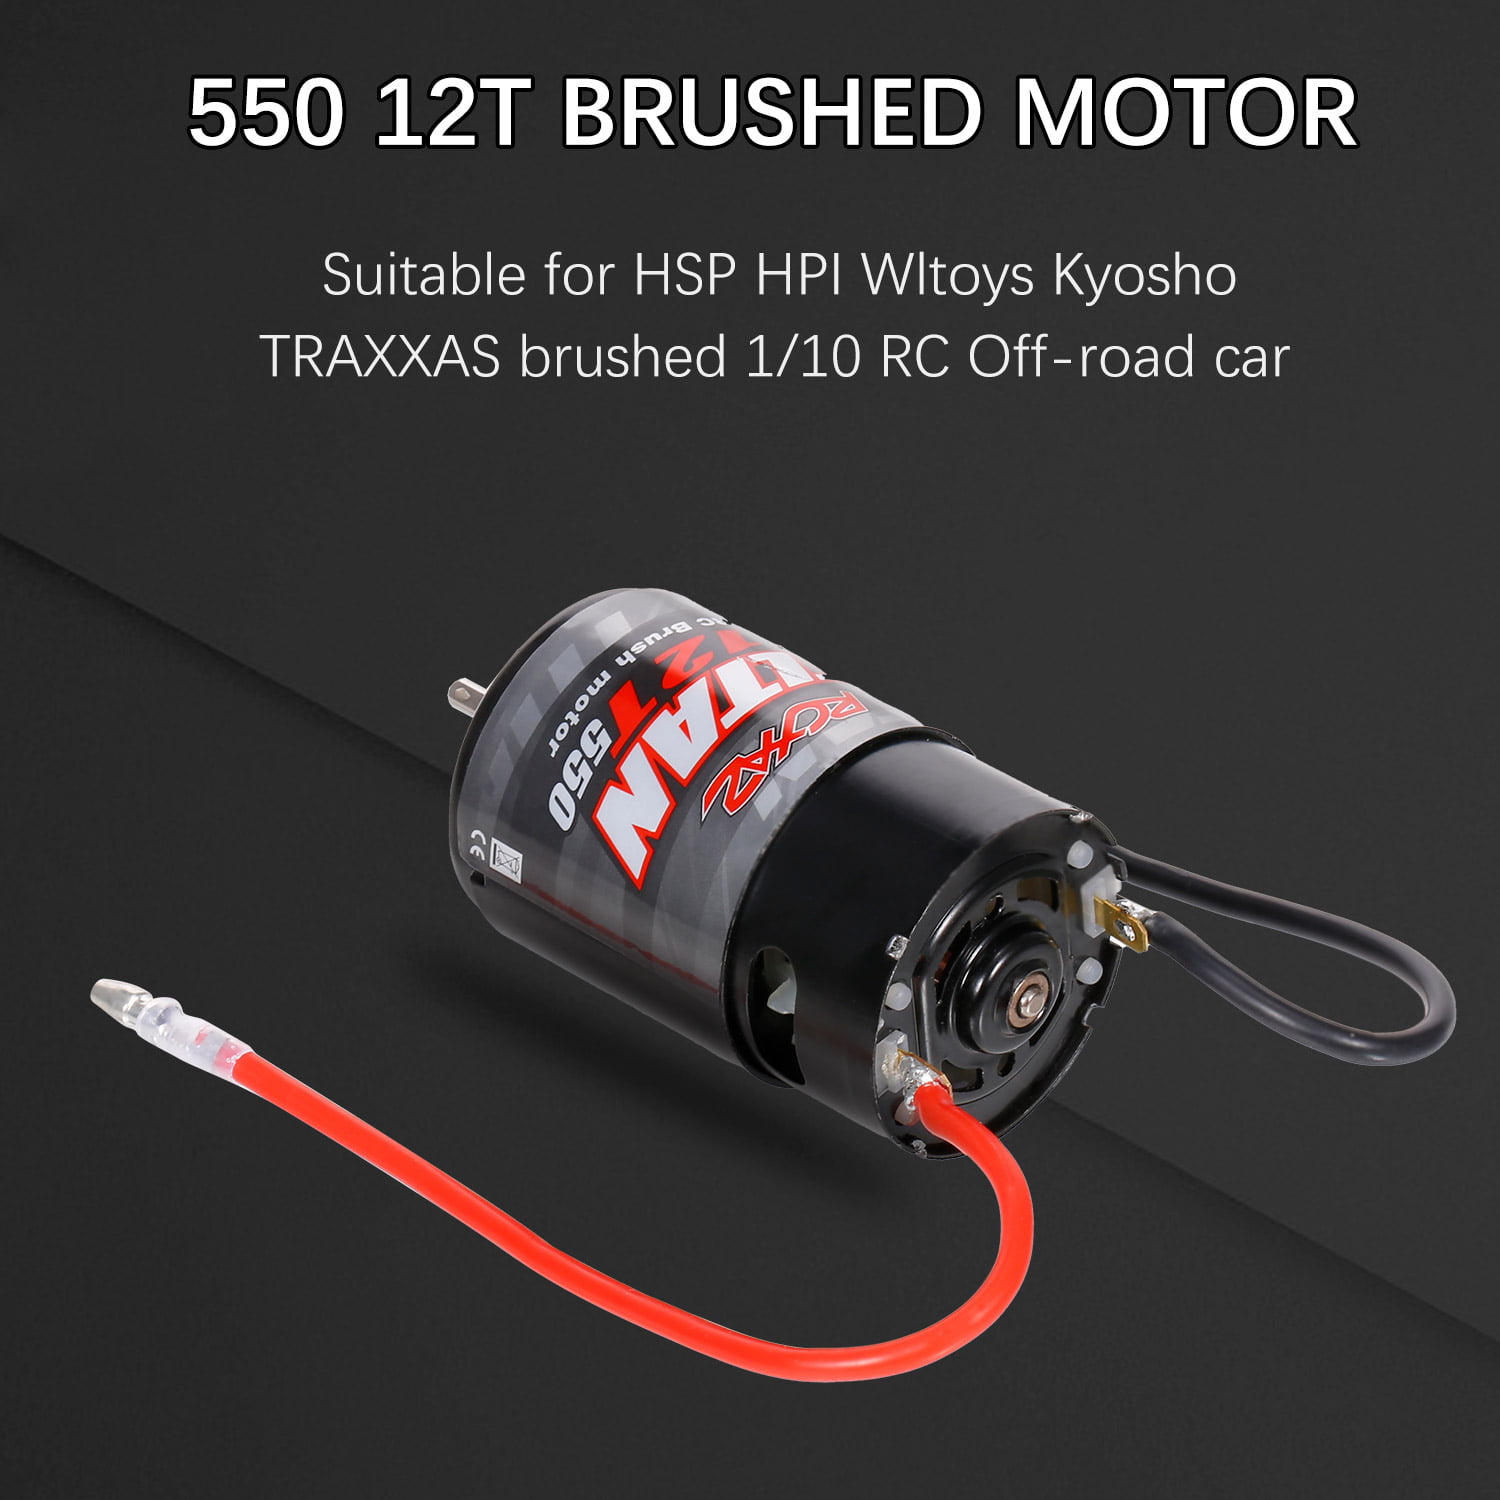 550 12T Brushed Motor For 1/10 Rc Off-Road Car Hsp Hpi Wltoy Kyosho Traxxas B1 